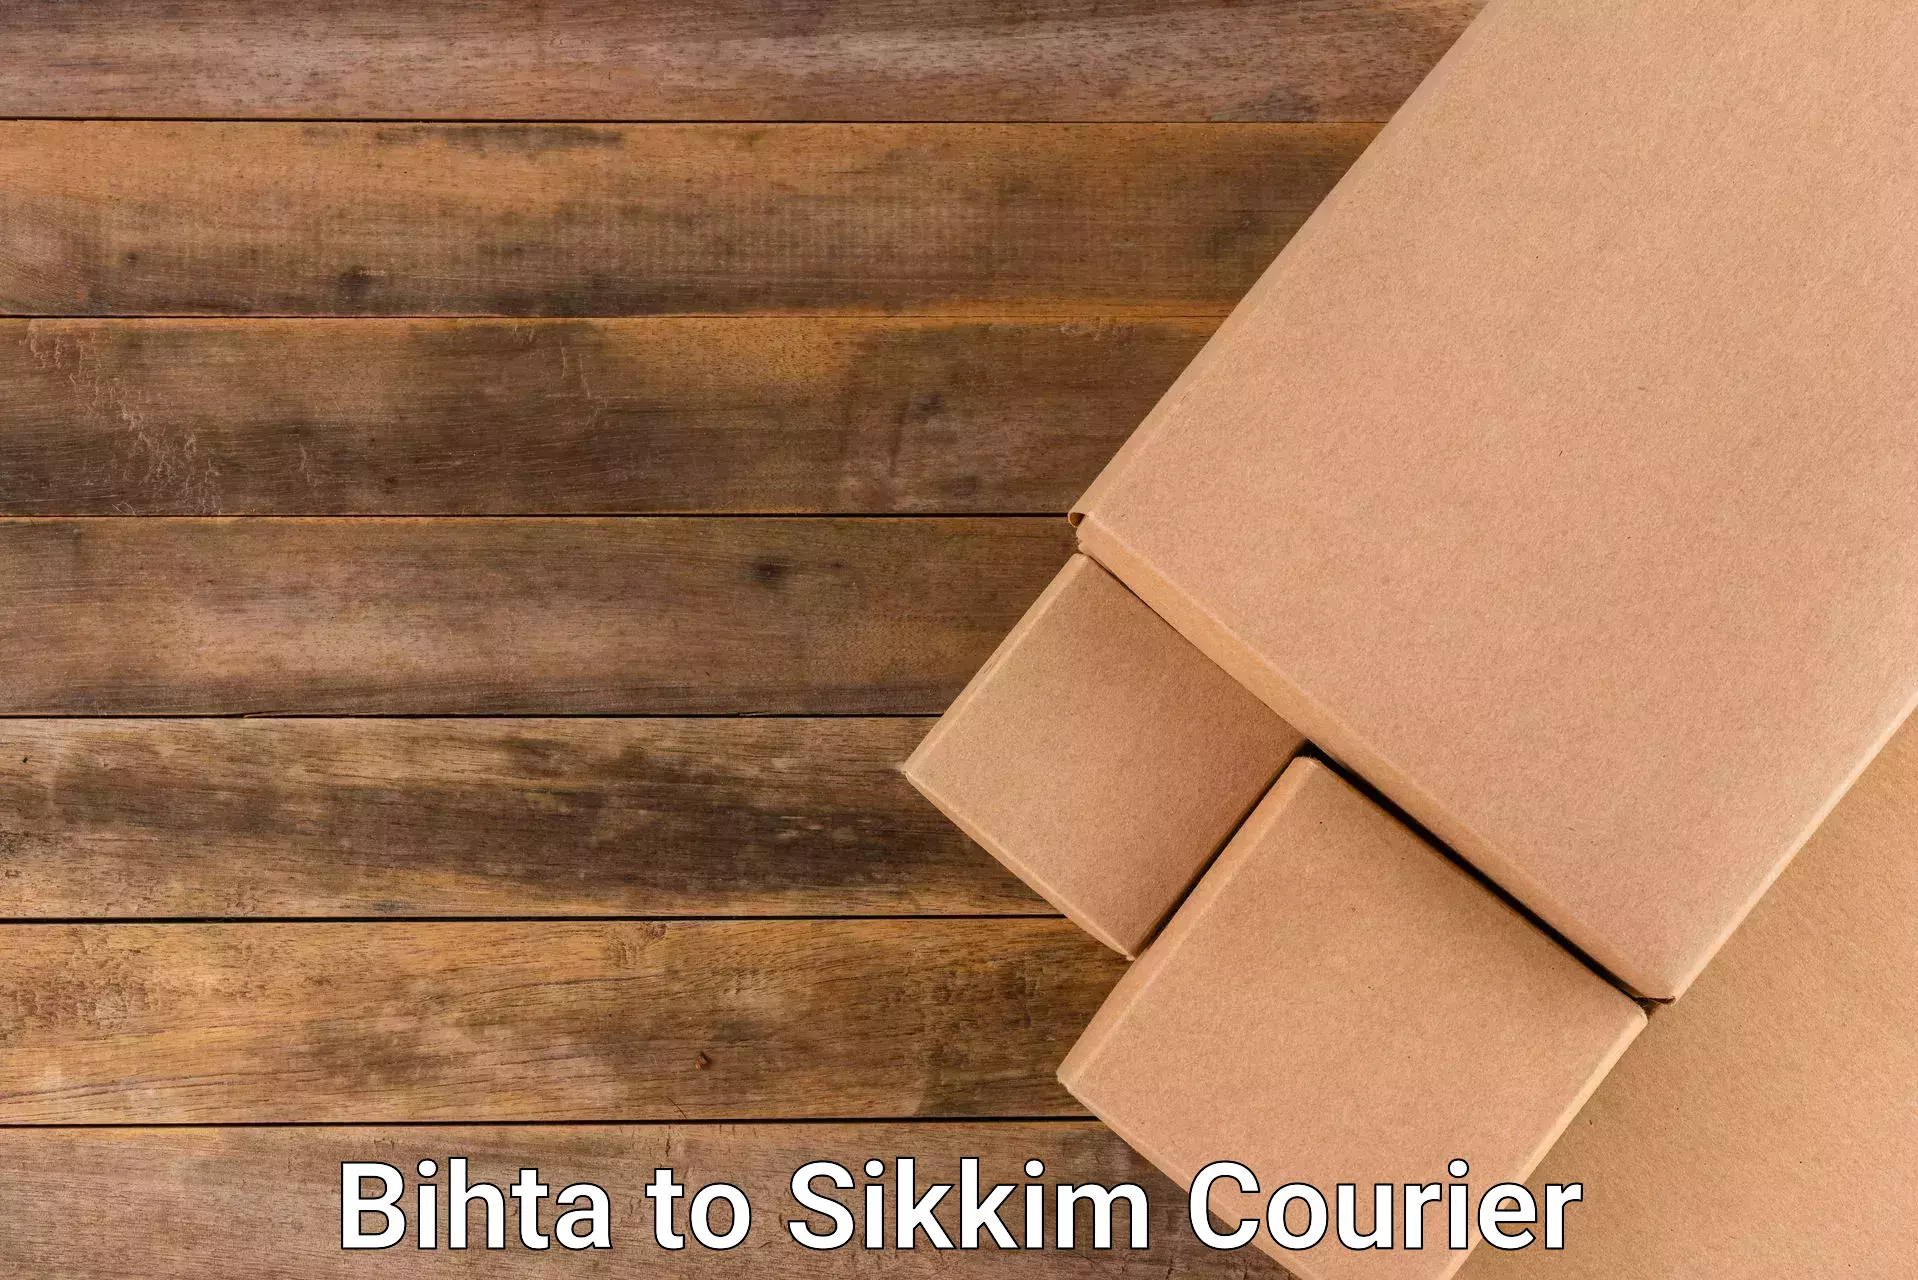 Seamless shipping experience Bihta to Pelling